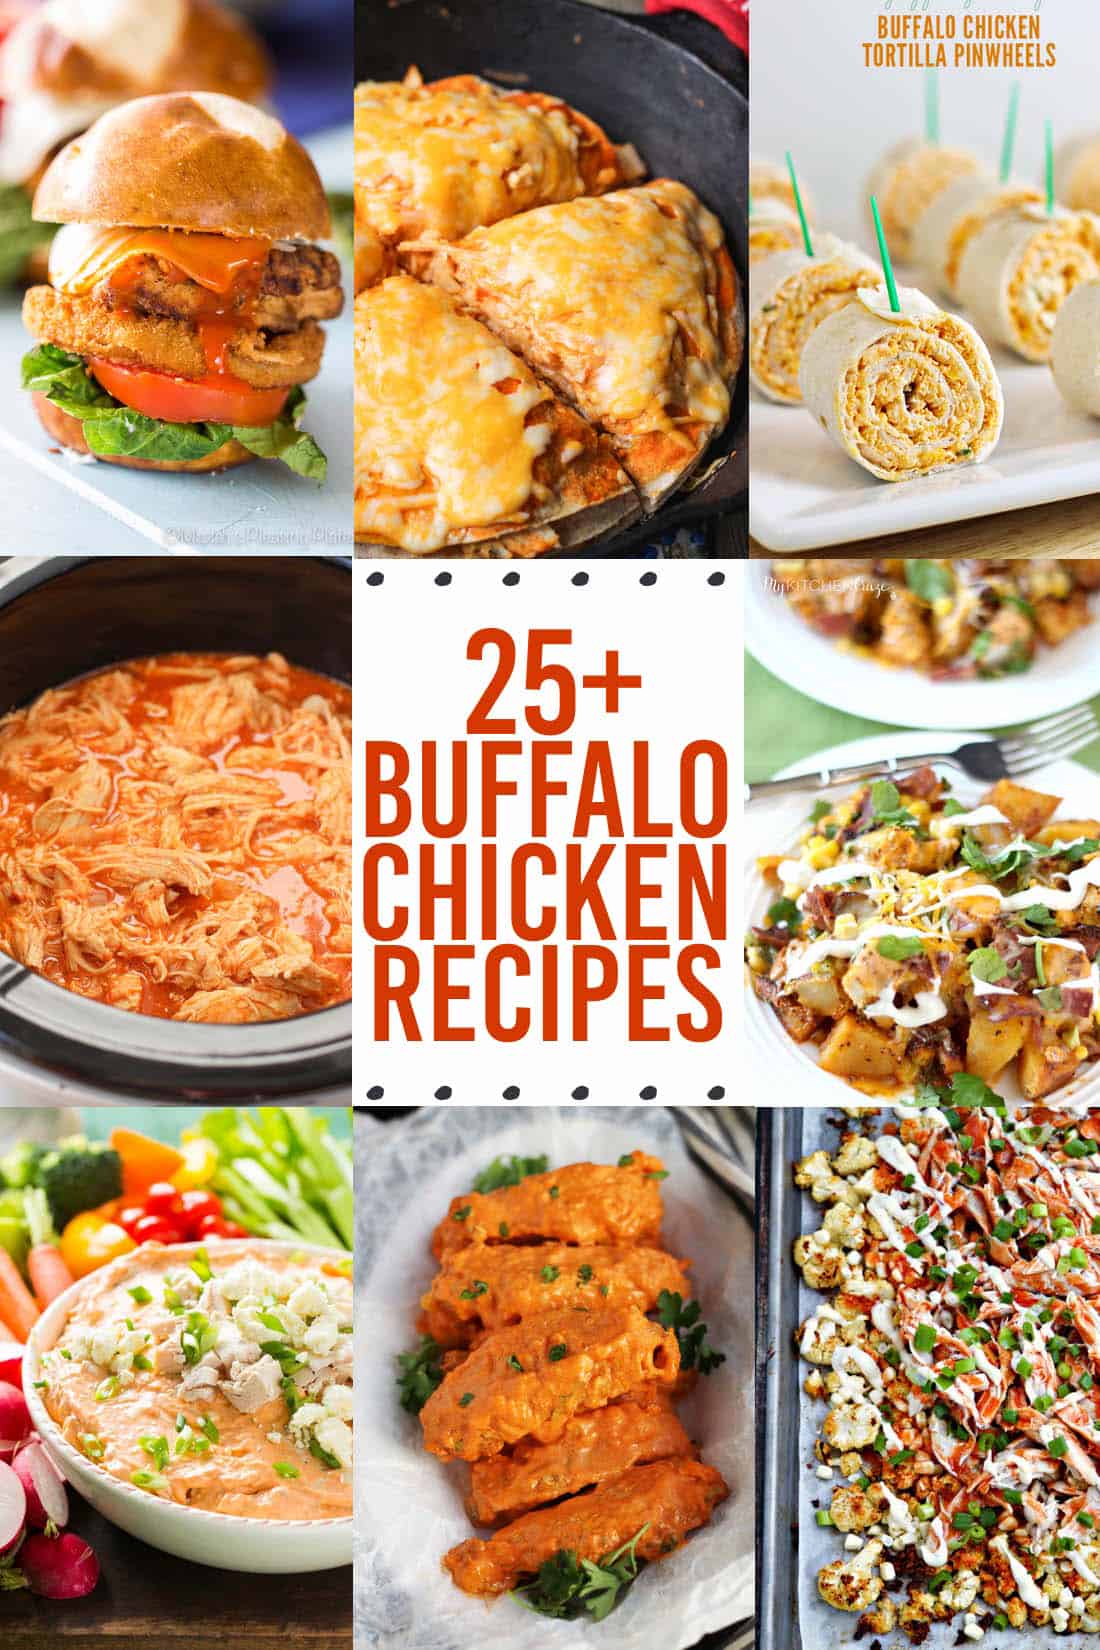 25+ Buffalo Chicken Recipes - perfect meal and appetizer recipes for Game Day (or anytime)! Dips, bites, sandwiches, pizza, pasta, and more.